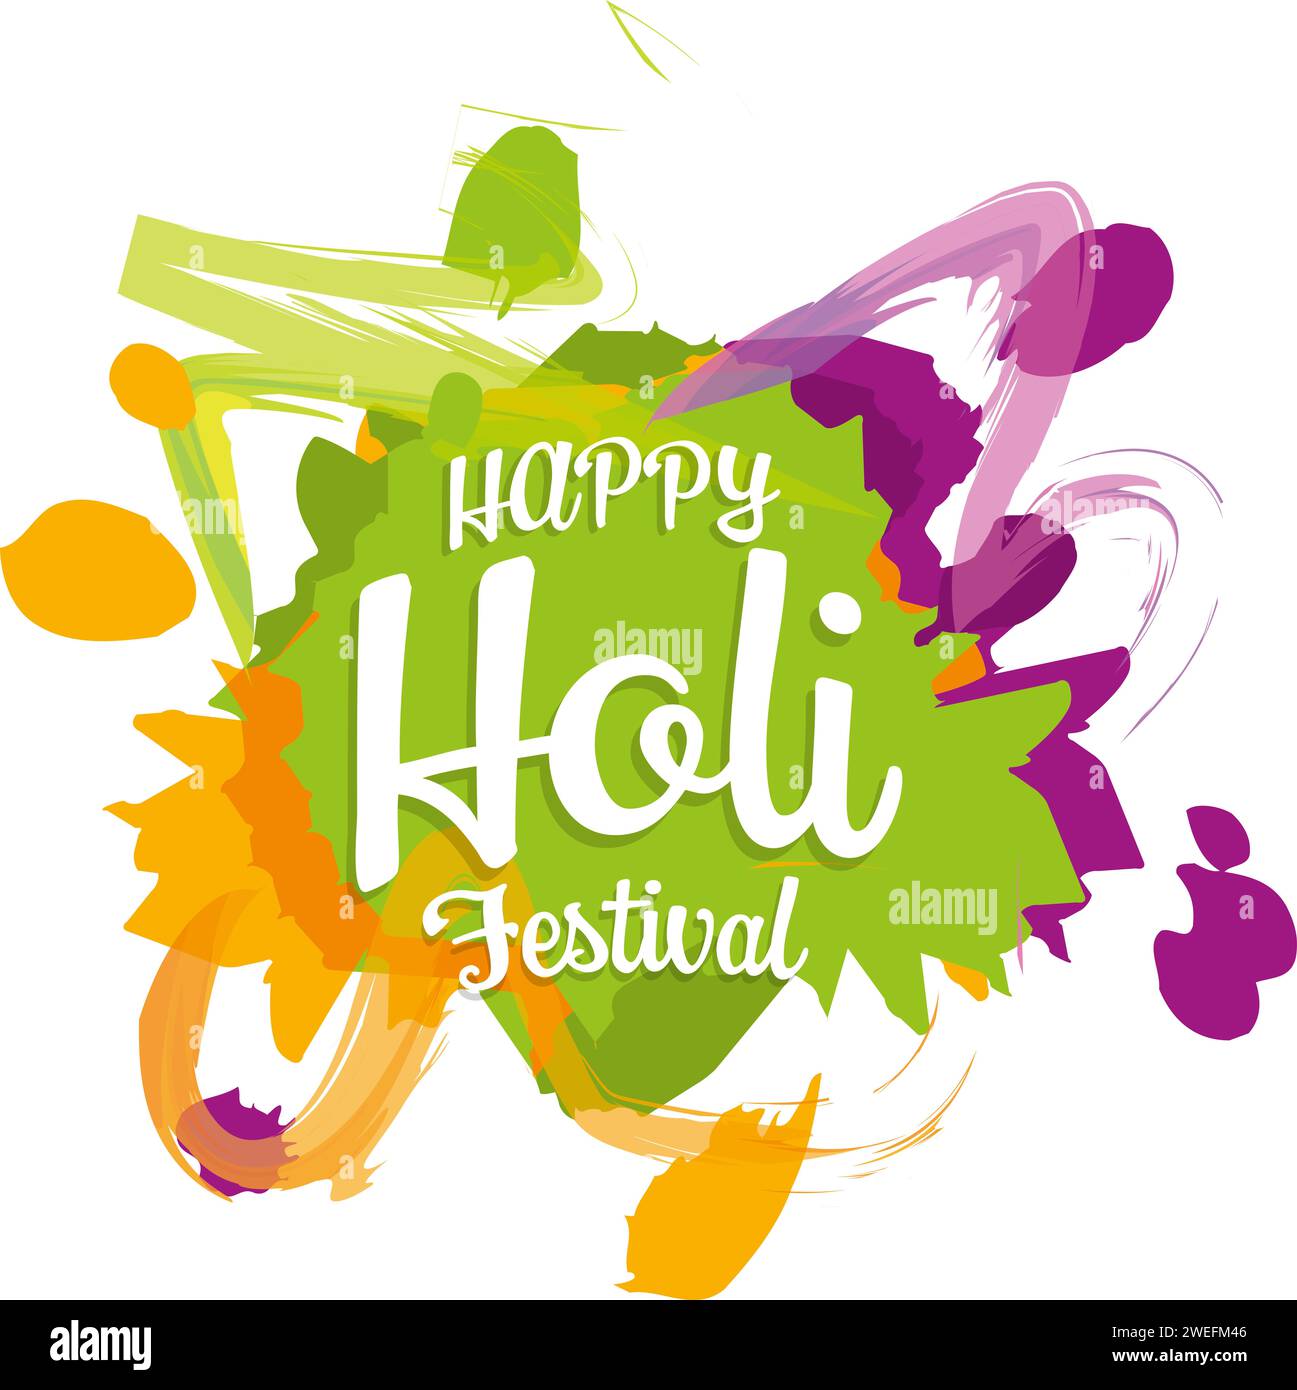 Illustration of color spots with text Happy holi festival with green main color Stock Photo